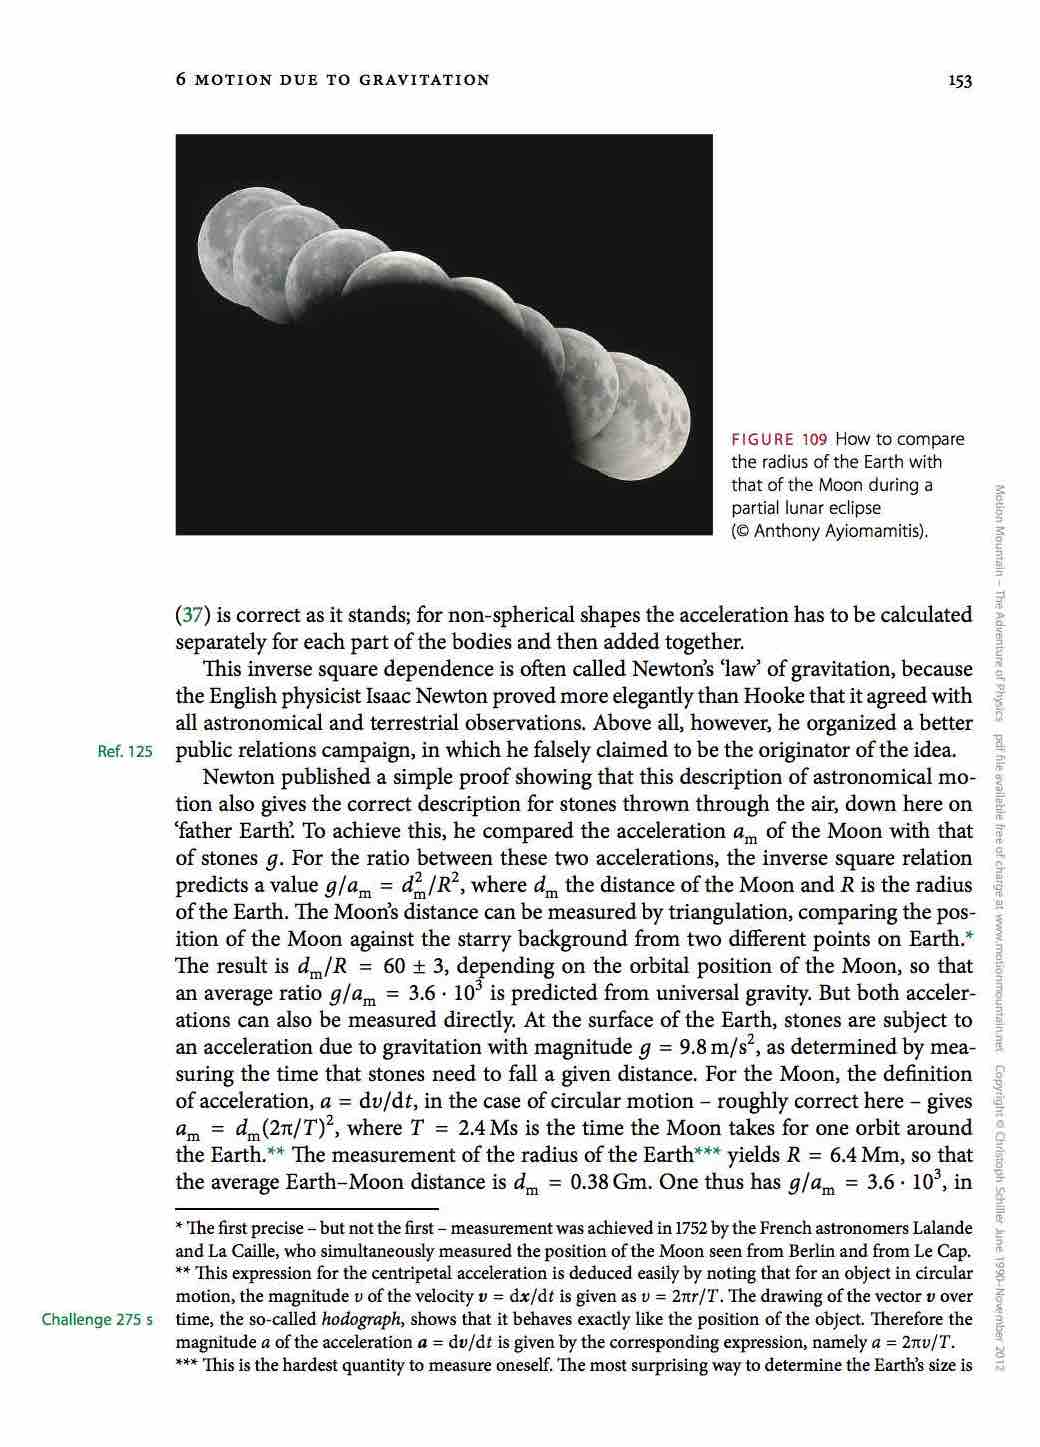 Motion Mountain free Physics Textbook page
153: 
Lunar Eclipse